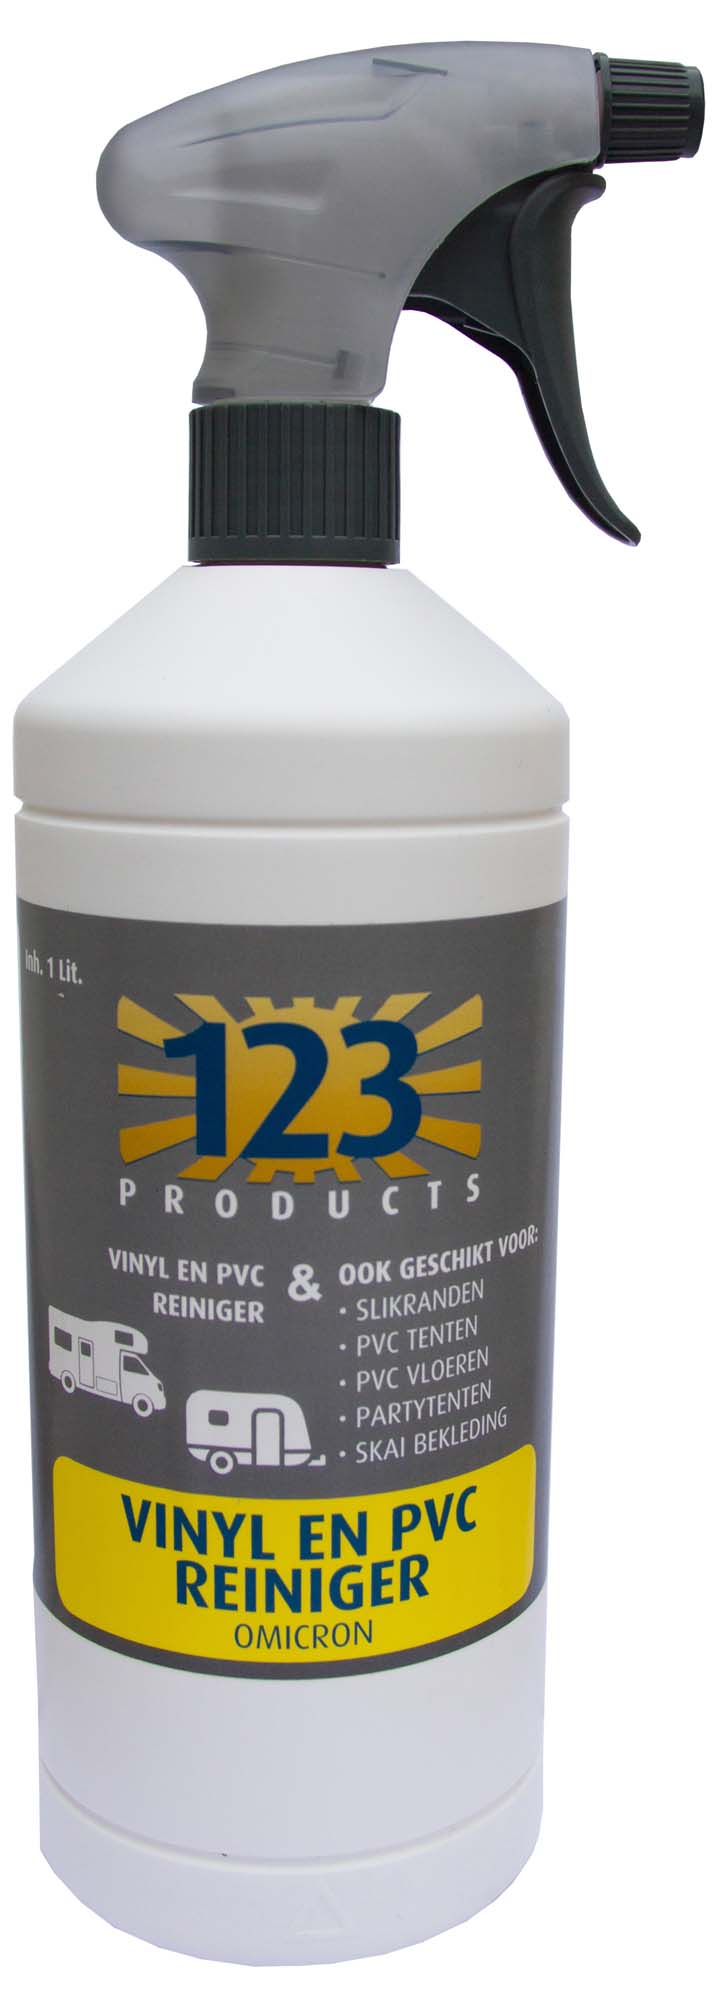 123 PRODUCTS Omicron